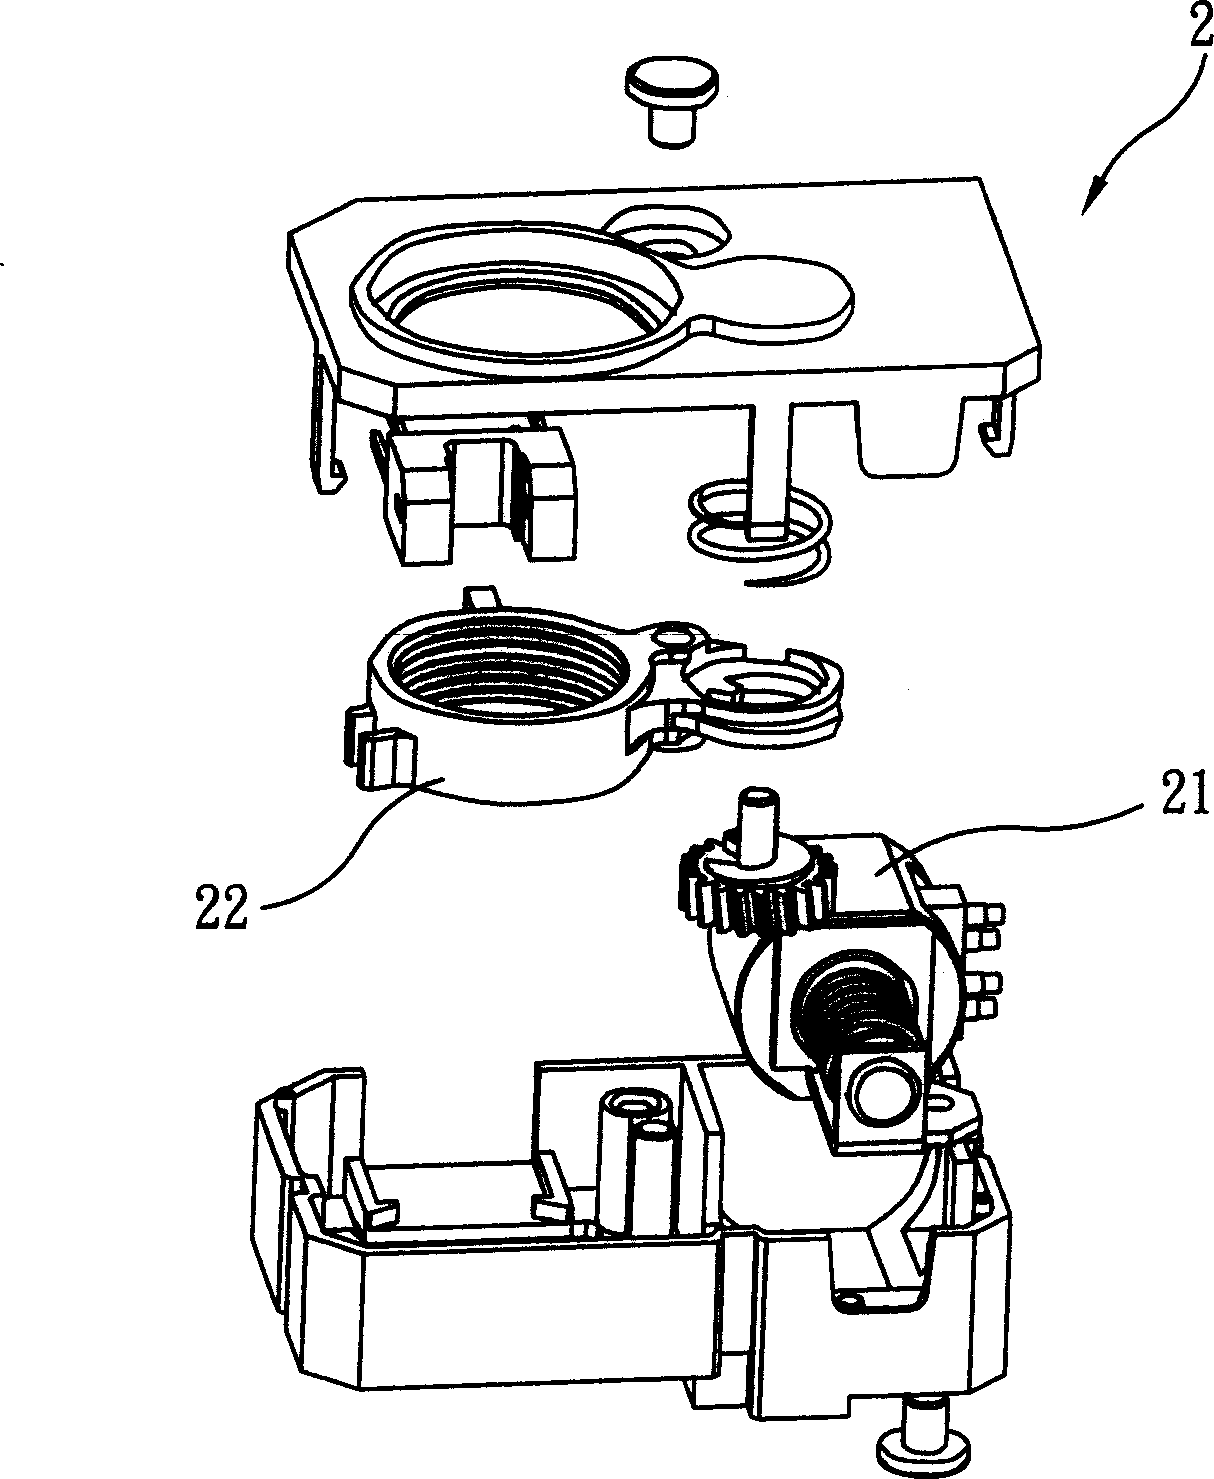 Automatic focusing device for lens